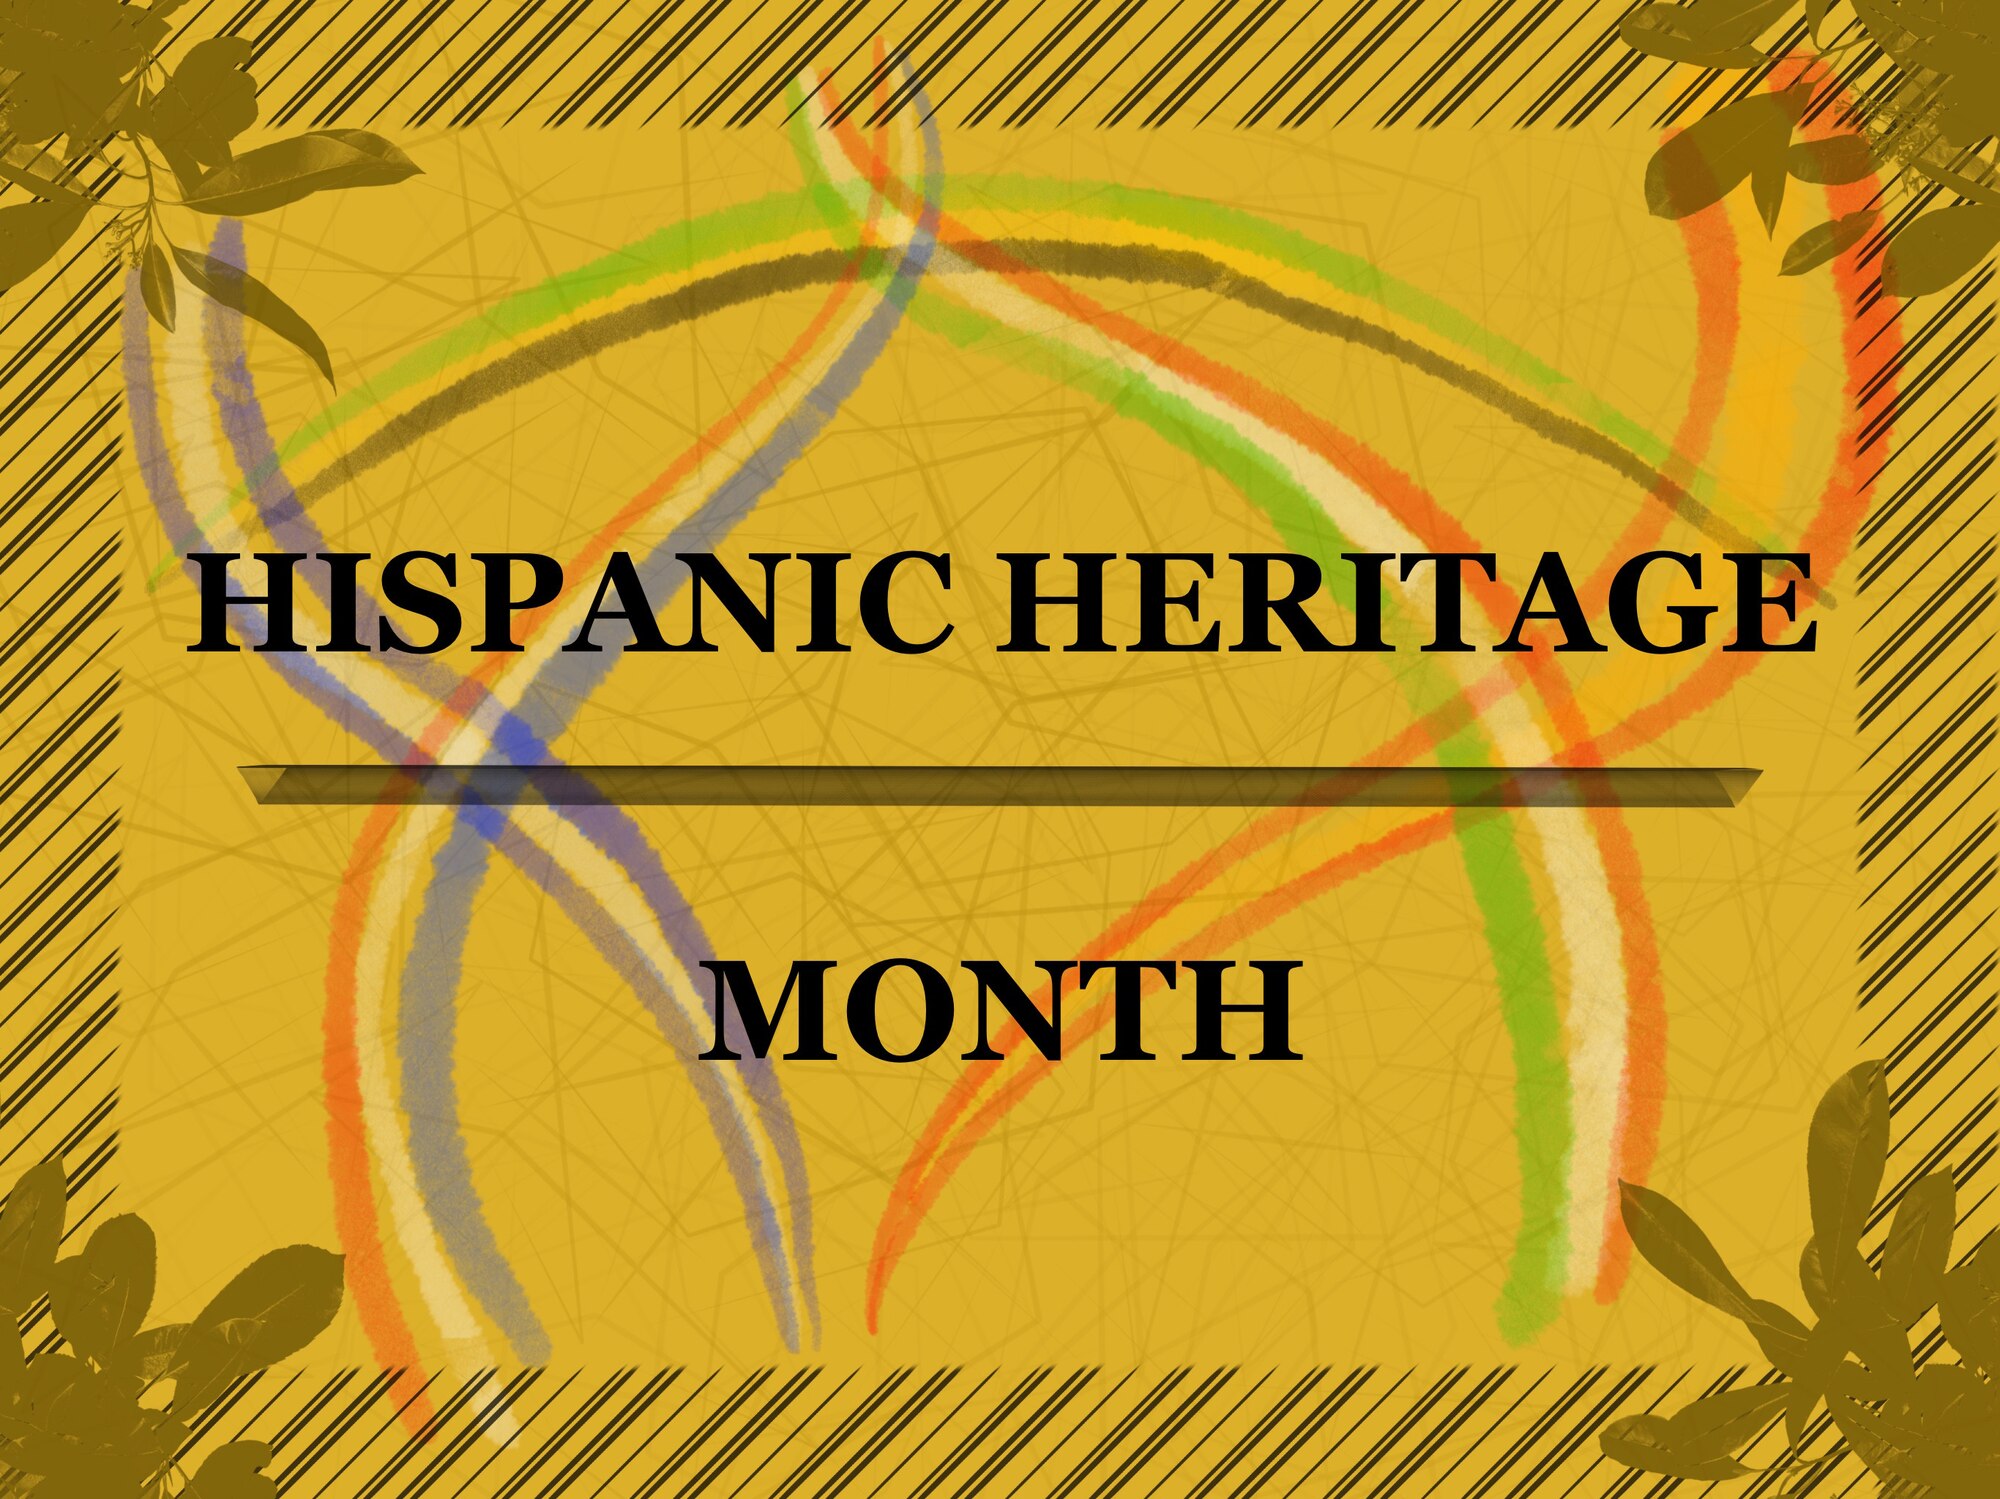 Sept. 15 through Oct. 15 is Hispanic Heritage Month, which celebrates the many contributions, histories and cultures of the Hispanic community in the U.S.